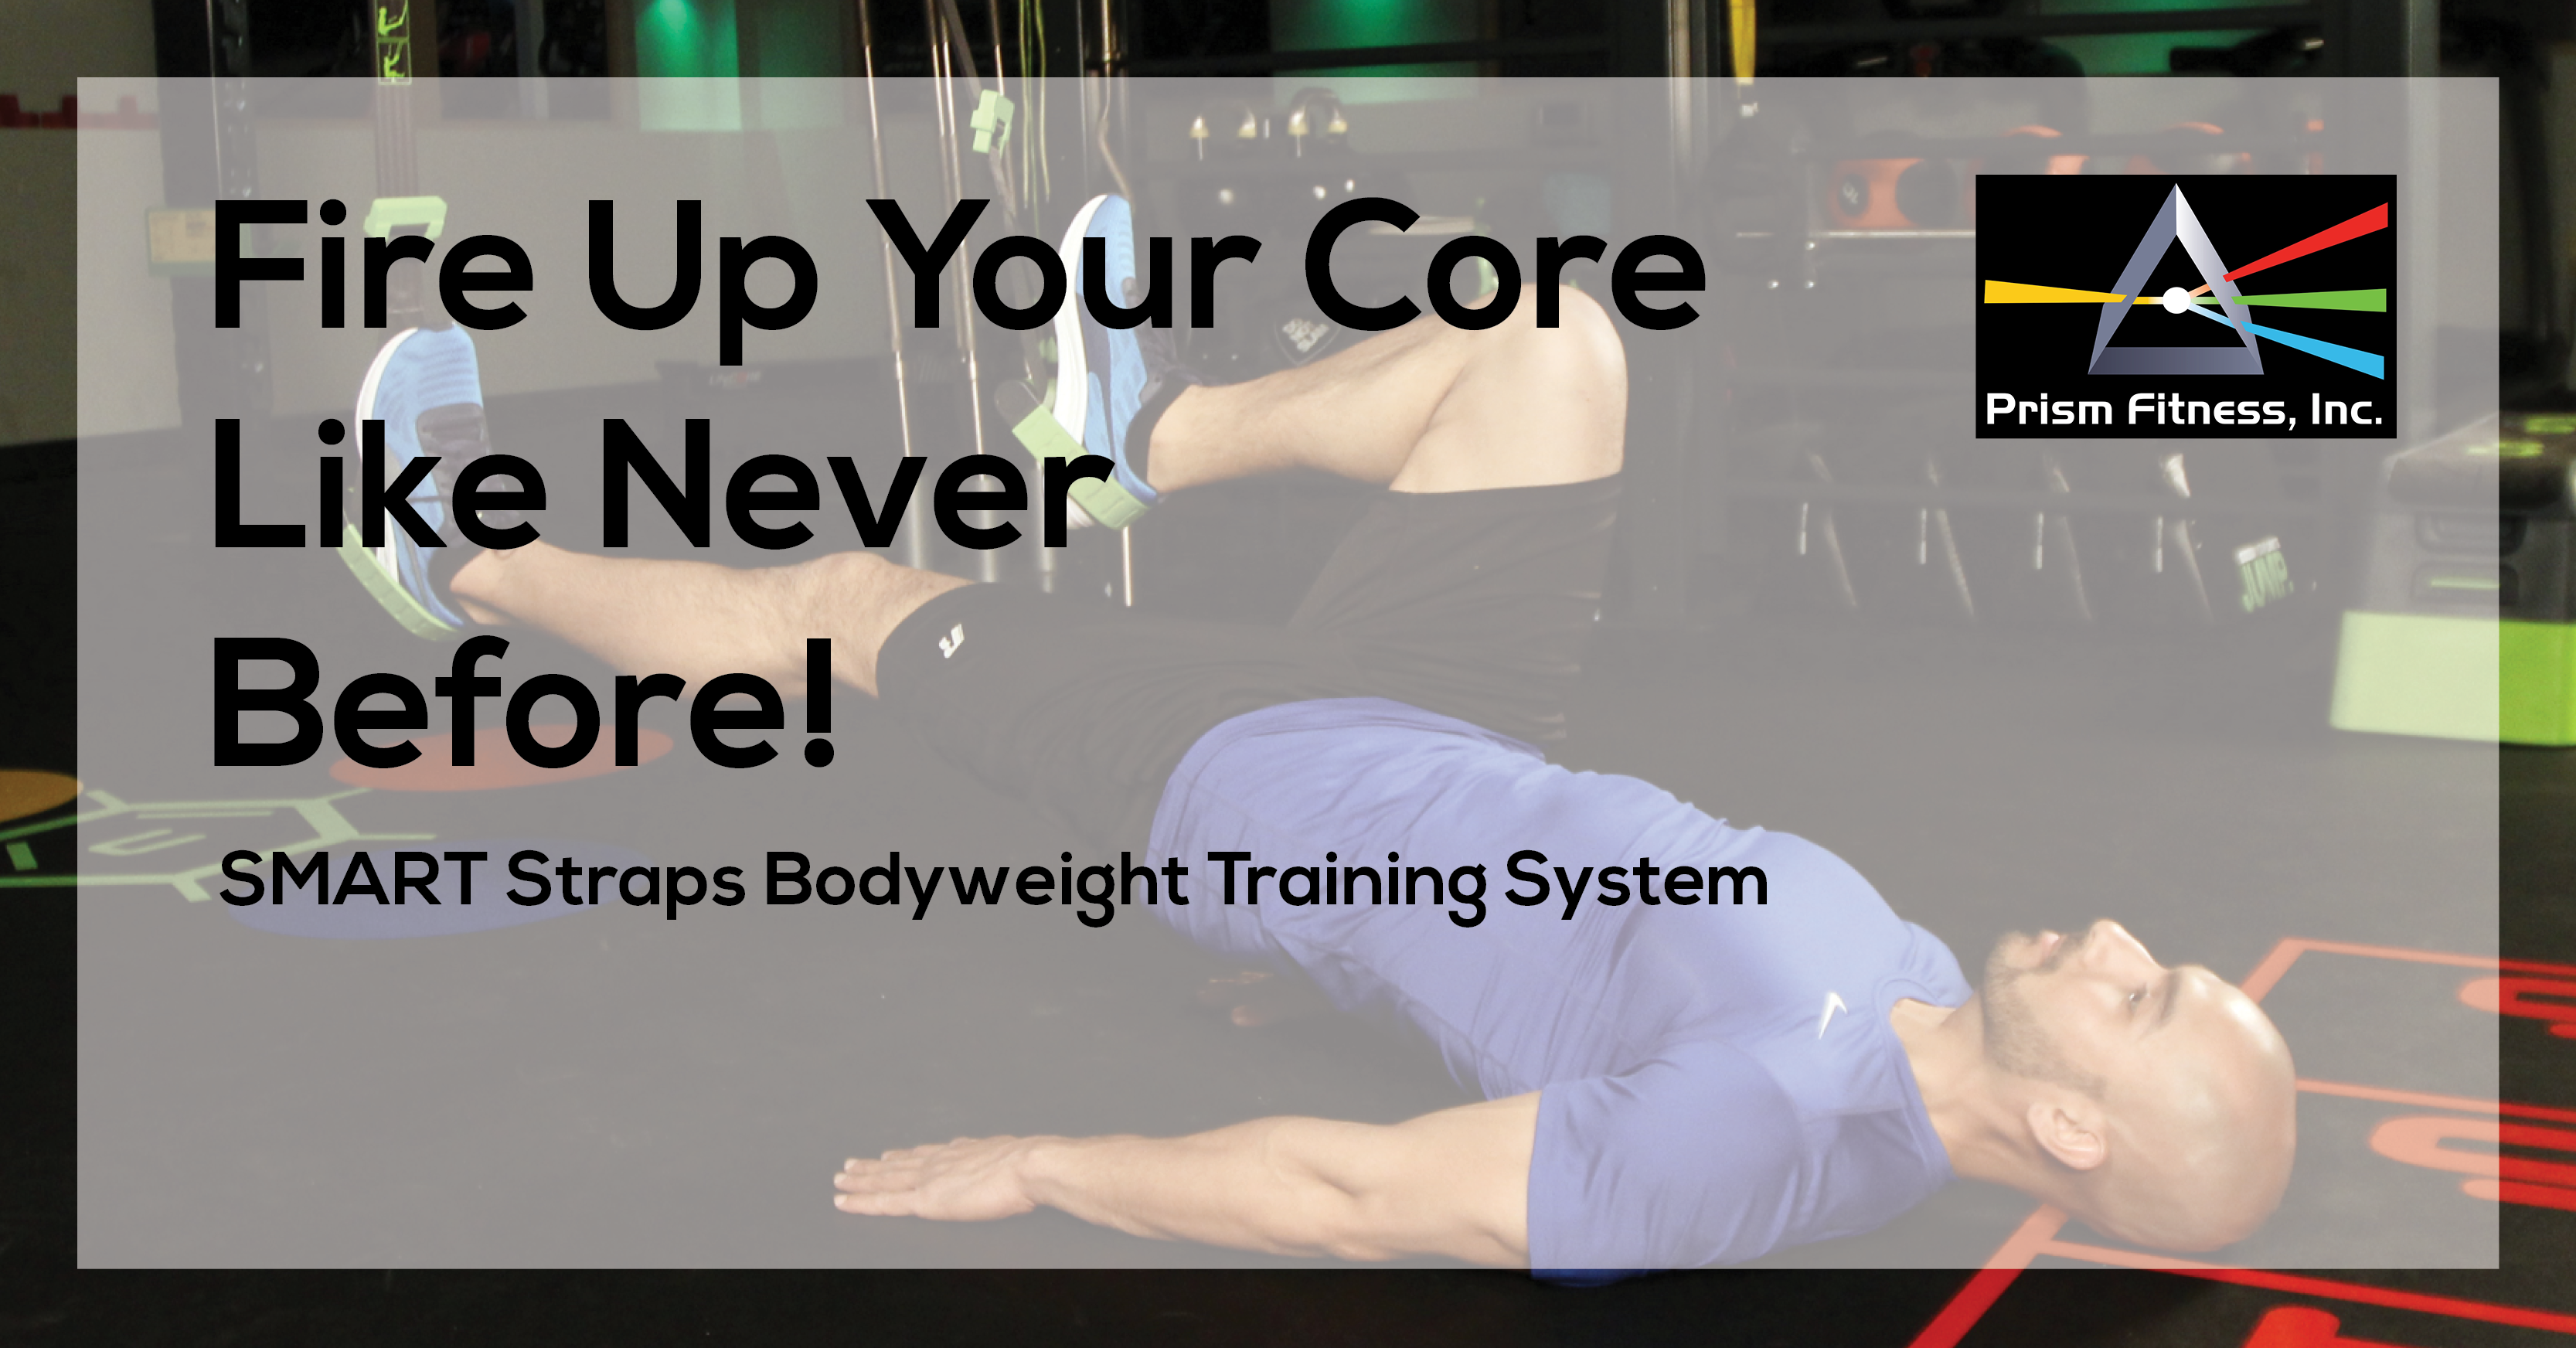 Fire Up your core like never before with SMART straps bodyweight training system